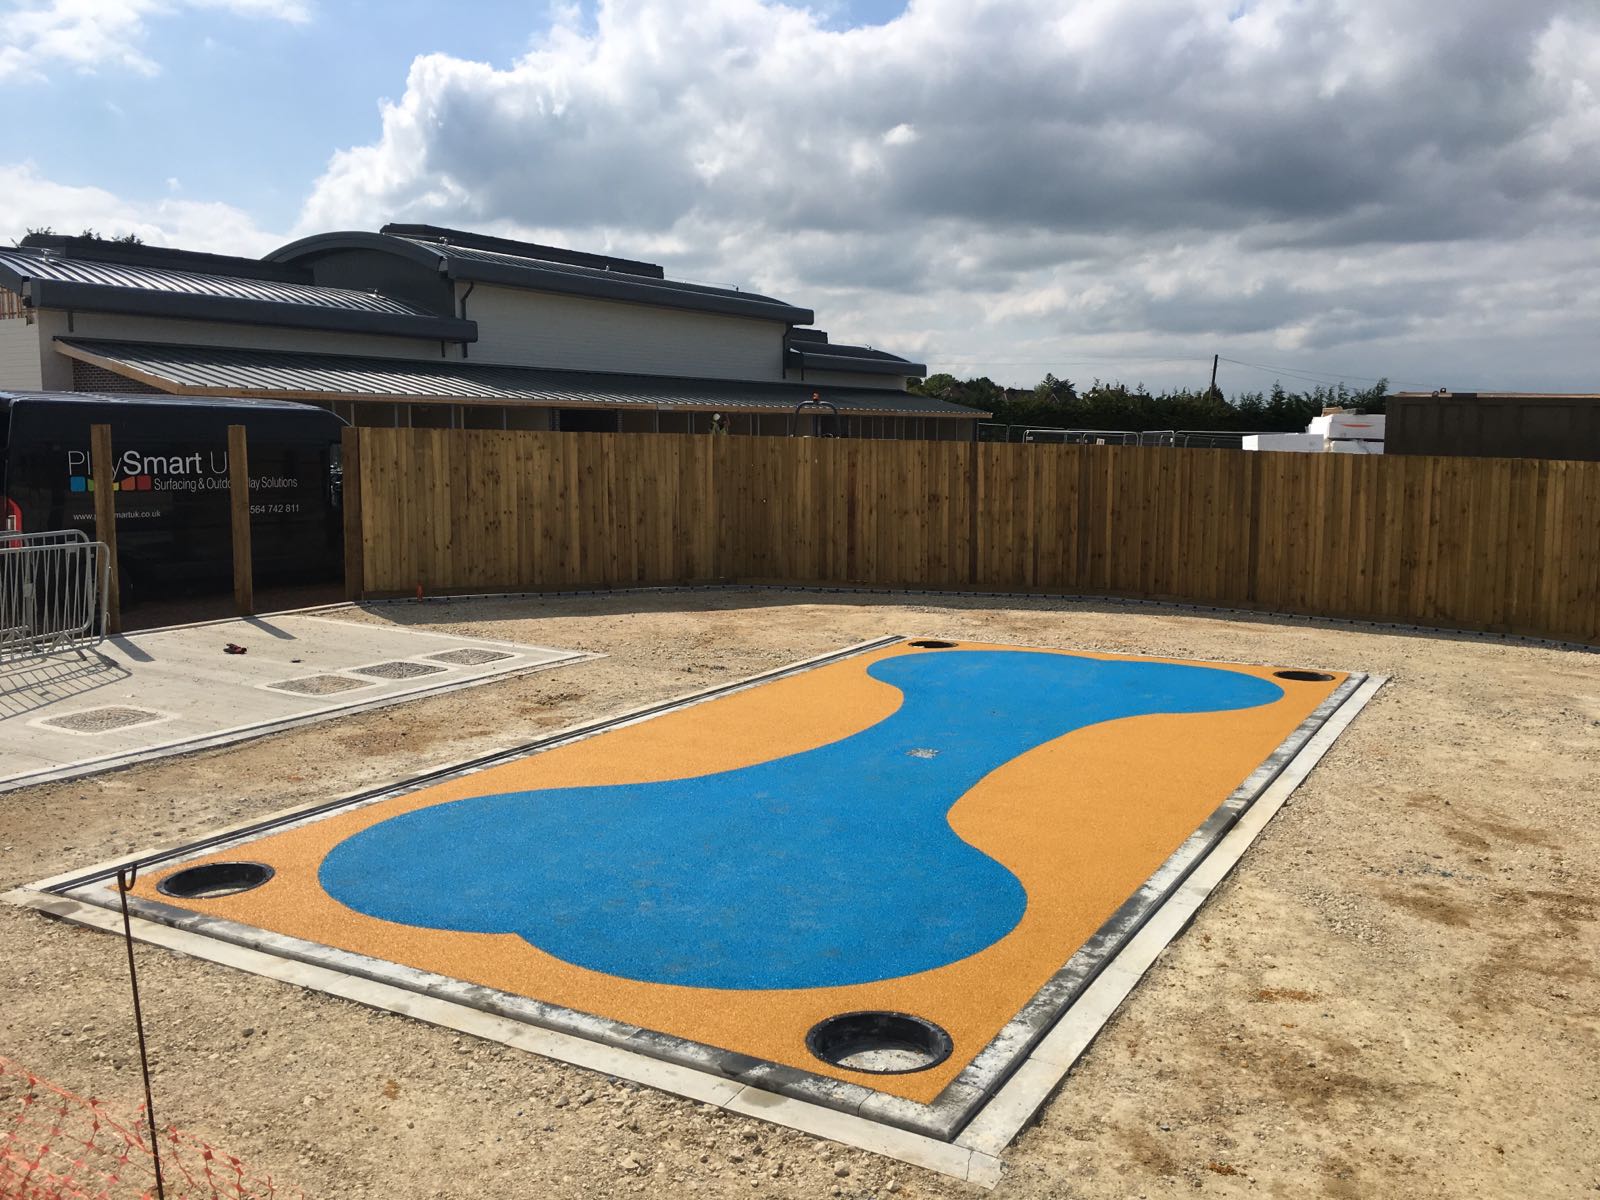 Yllow and blue Safety Surfacing Poured Design with wetpour rubber in the shape of a large bone